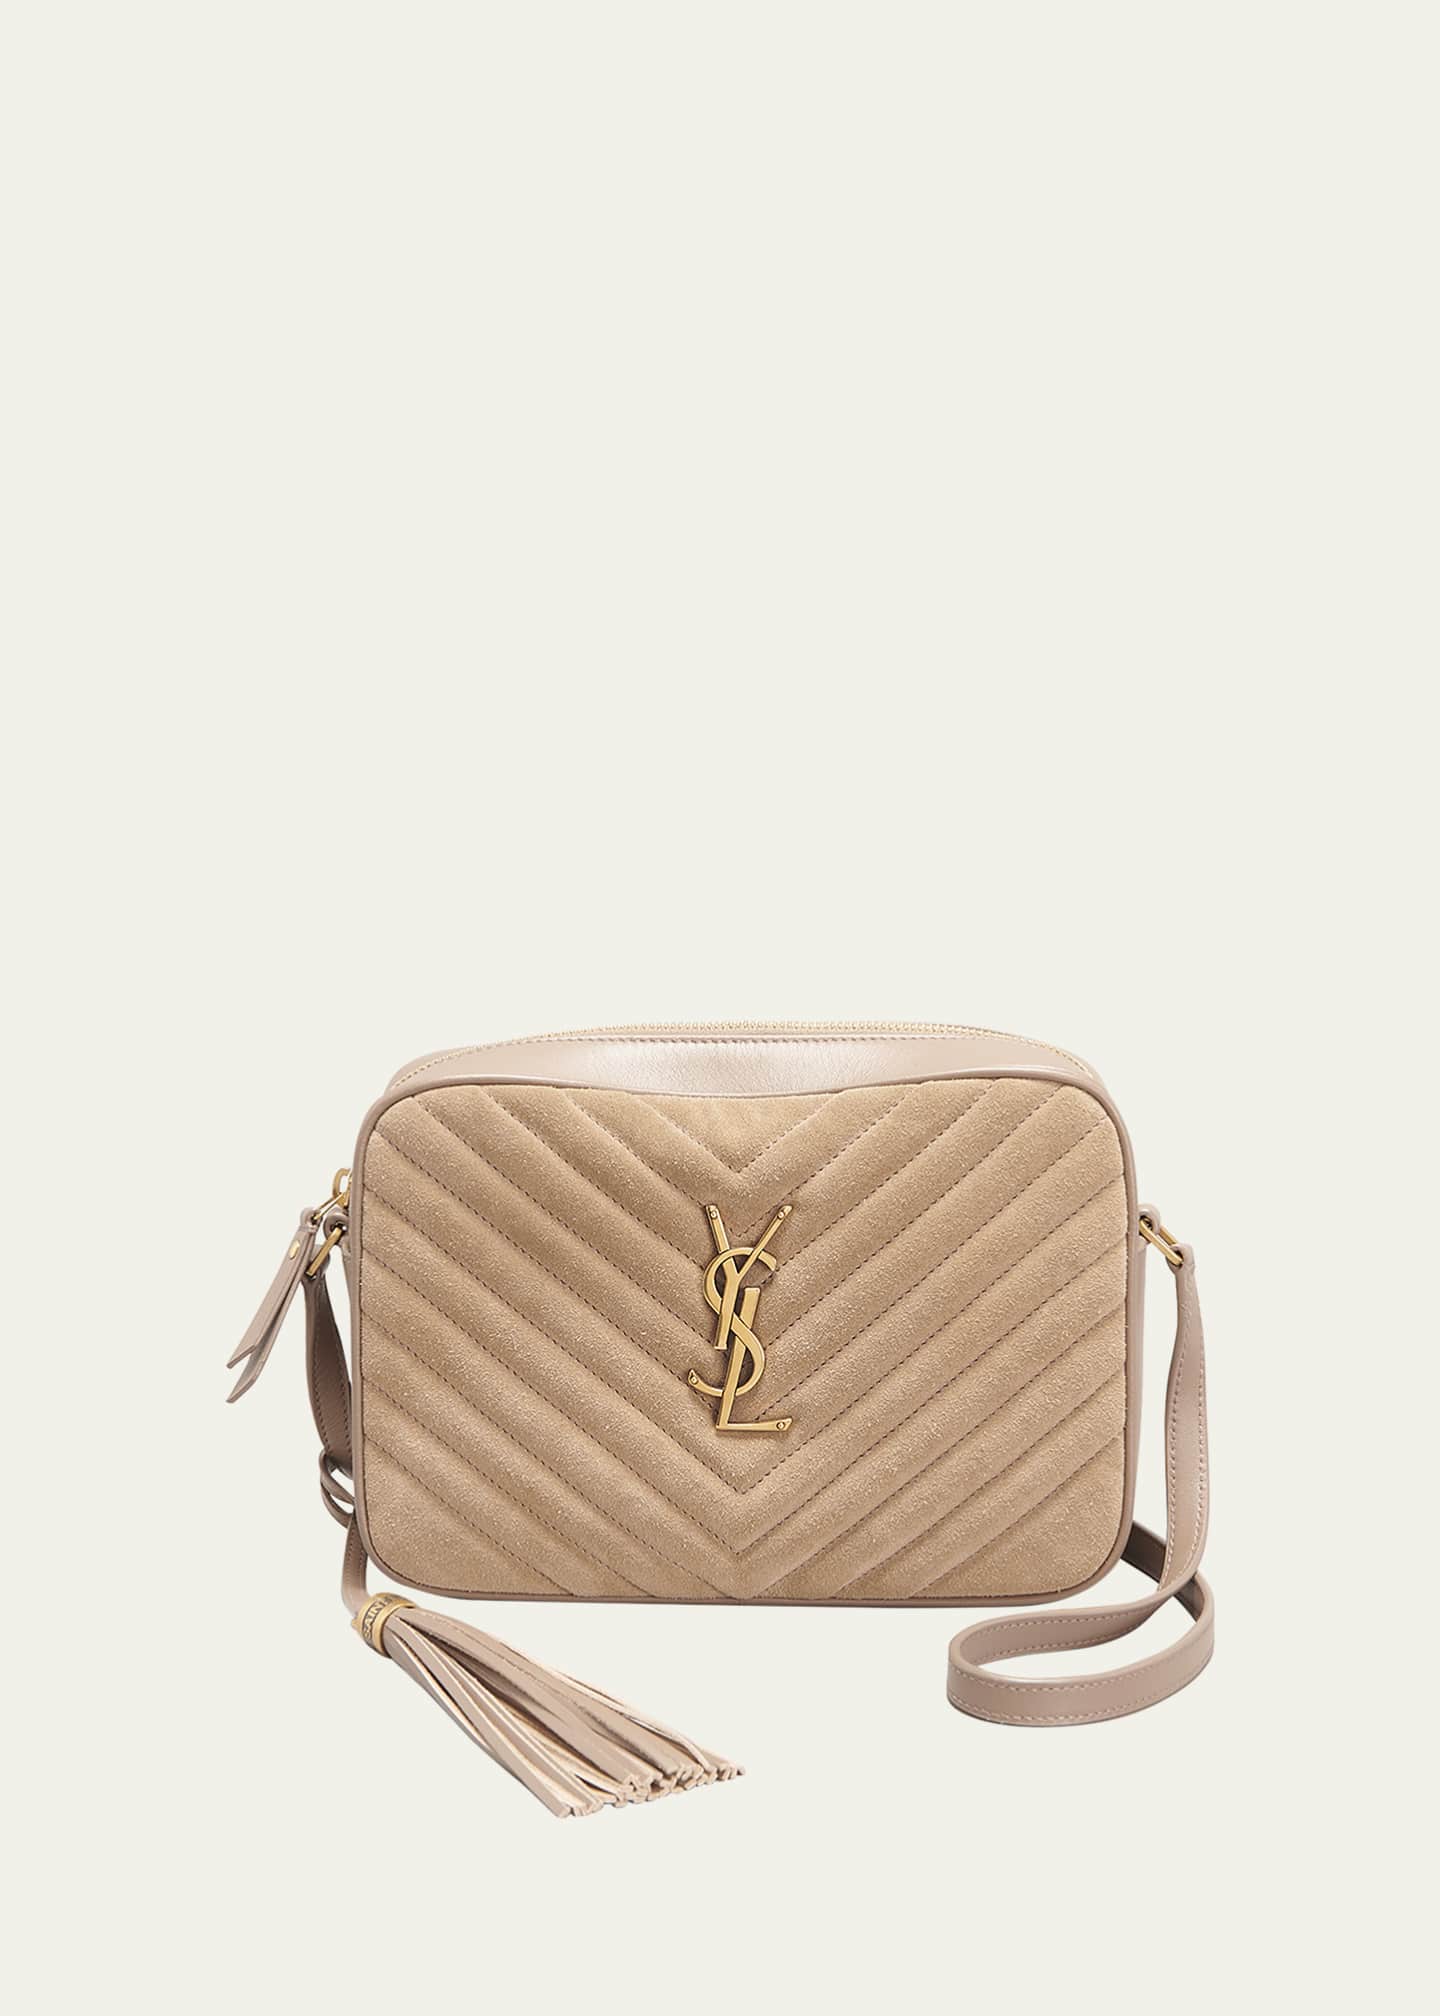 Saint Laurent Lou Medium Ysl Quilted Leather Crossbody Bag Taupe